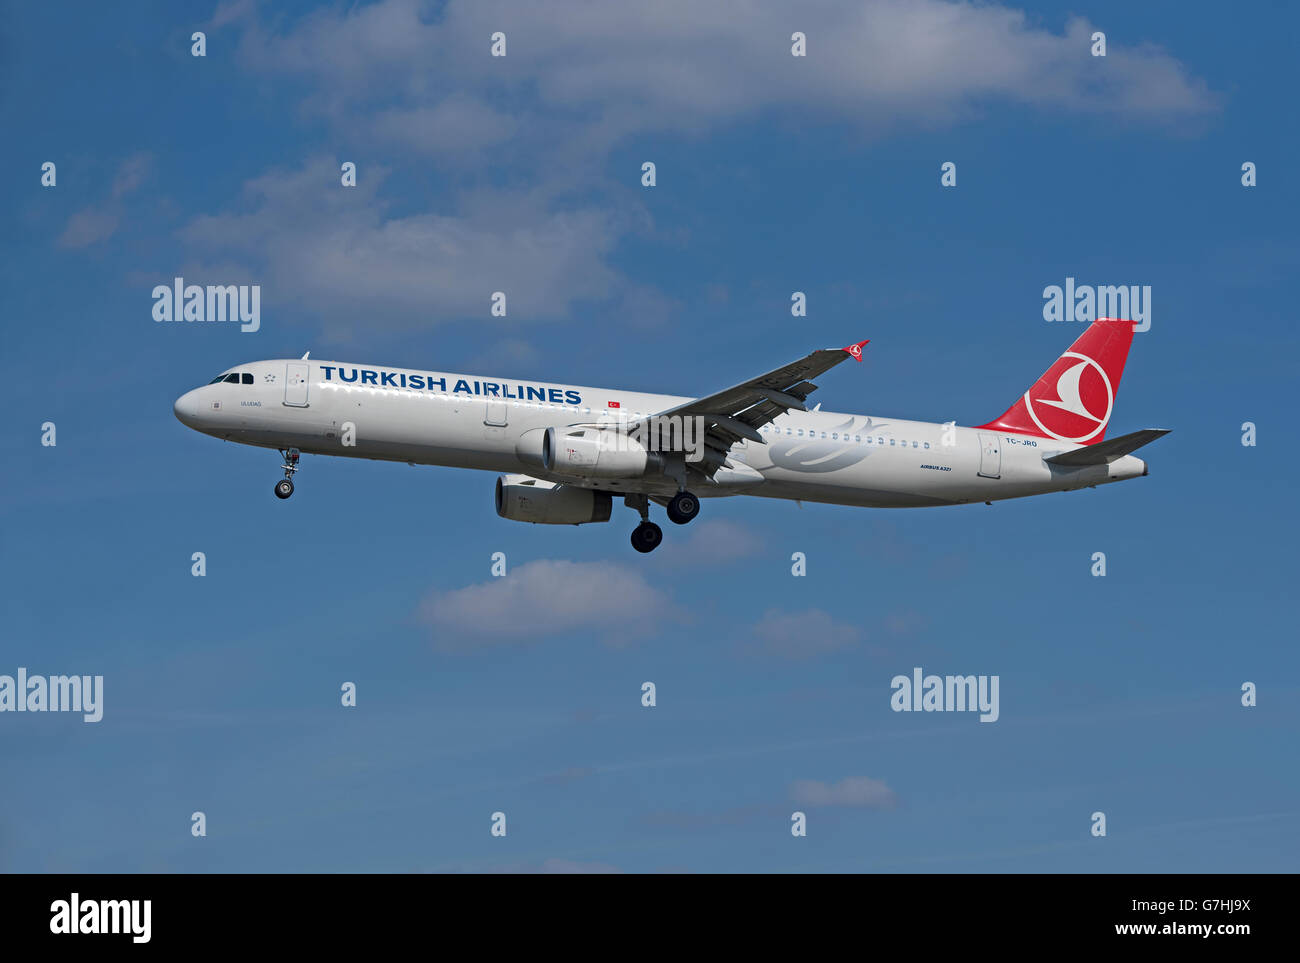 Turkish Airlines Airbus 321-231 (Uludag) about to land at London Heathrow Airport.  SCO 382. Stock Photo